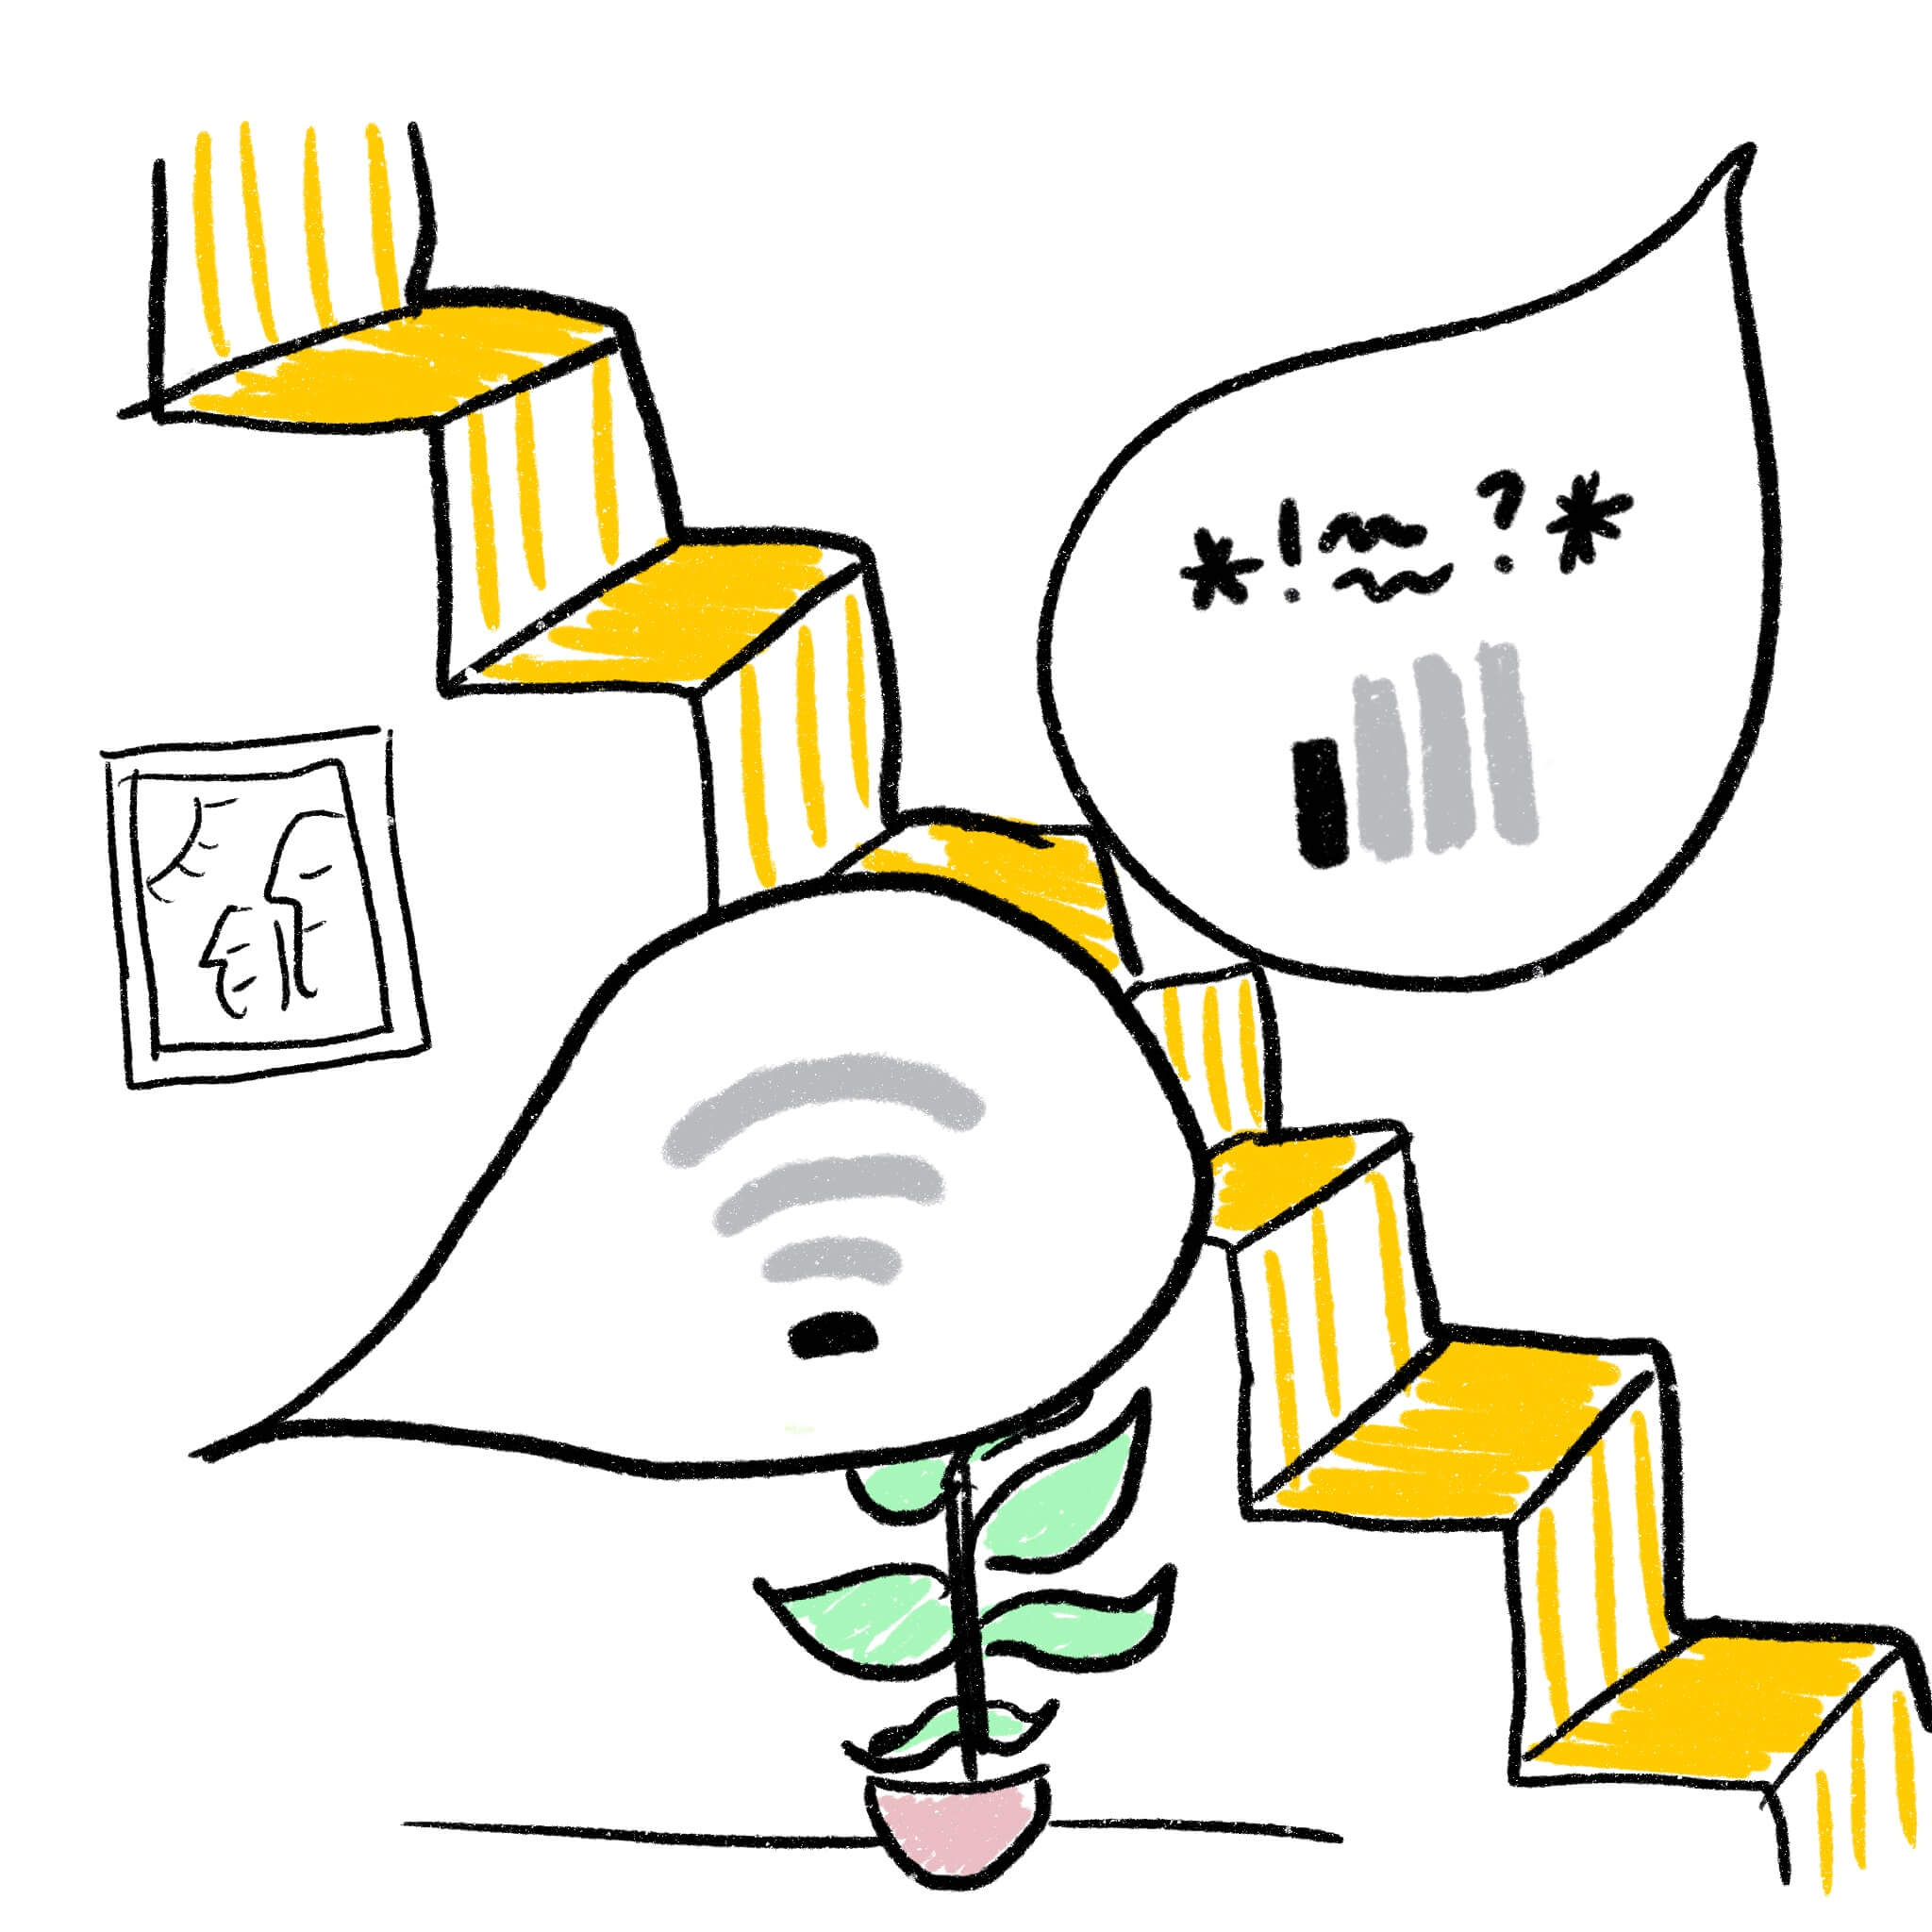 Illustration of stairs and two speech bubbles, talking about Wi-Fi/service